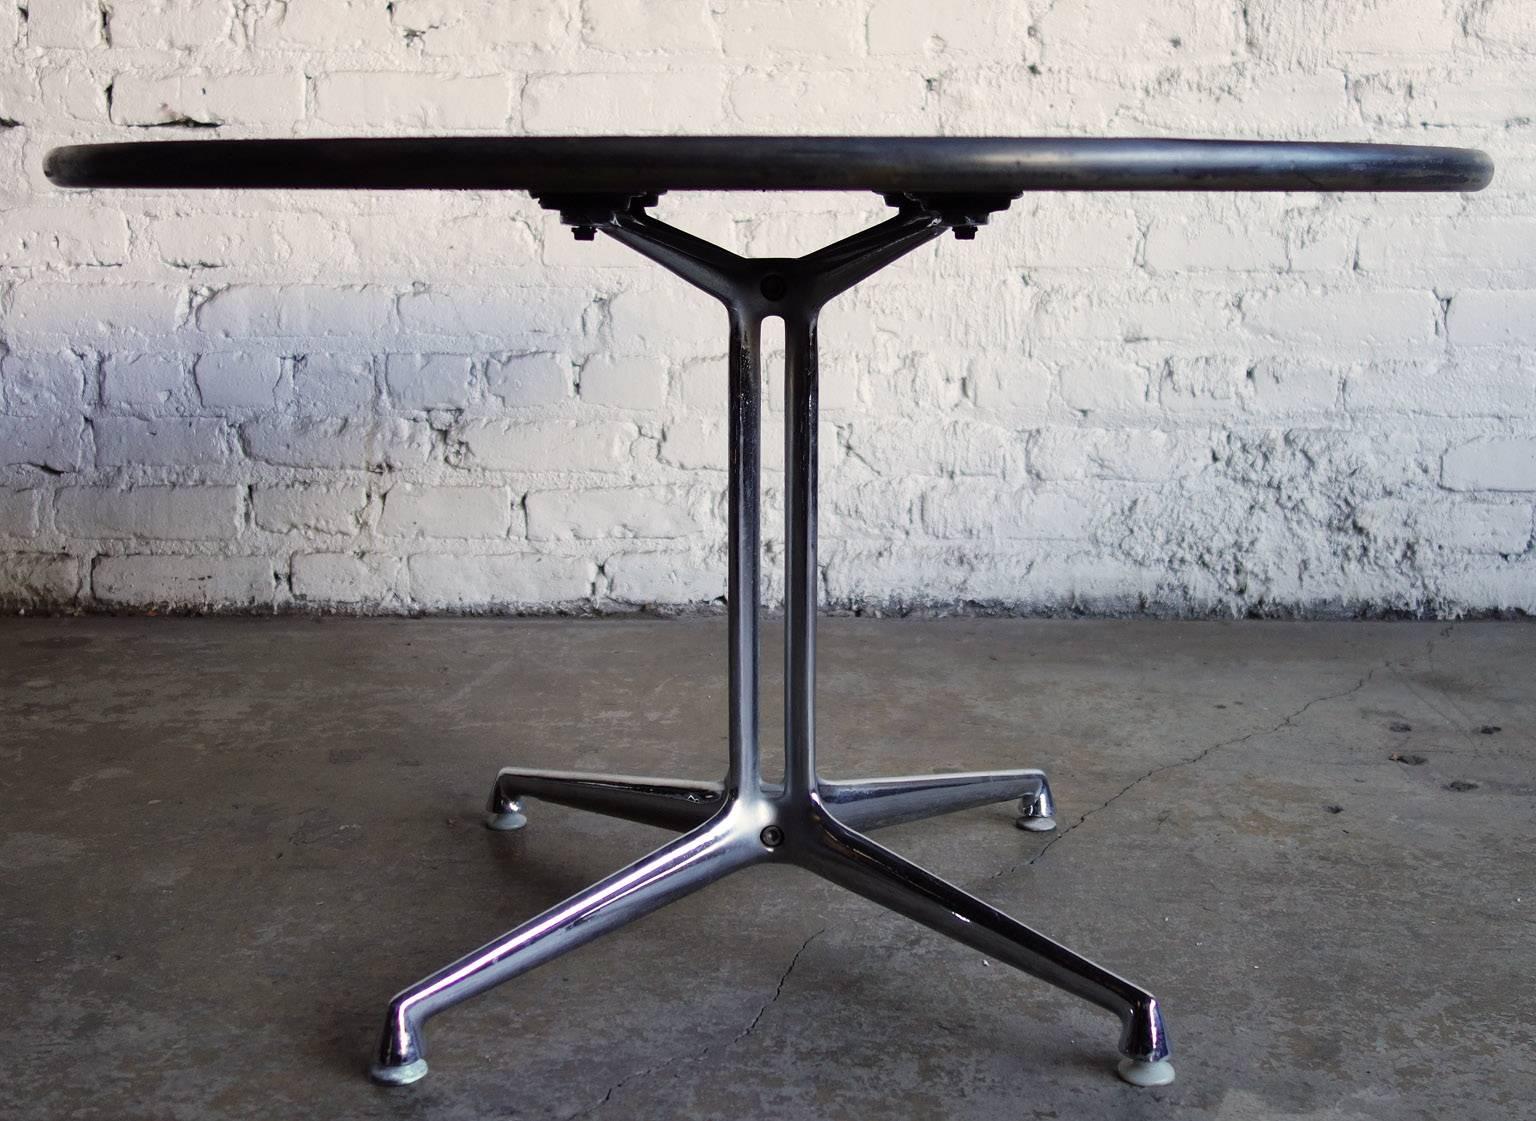 Designed by Alexander Girard and Charles and Ray Eames for the La Fonda Del Sol Restaurant. This table was available through Herman Miller for a short time. This example has a natural late top. A Mid-Century masterpiece.